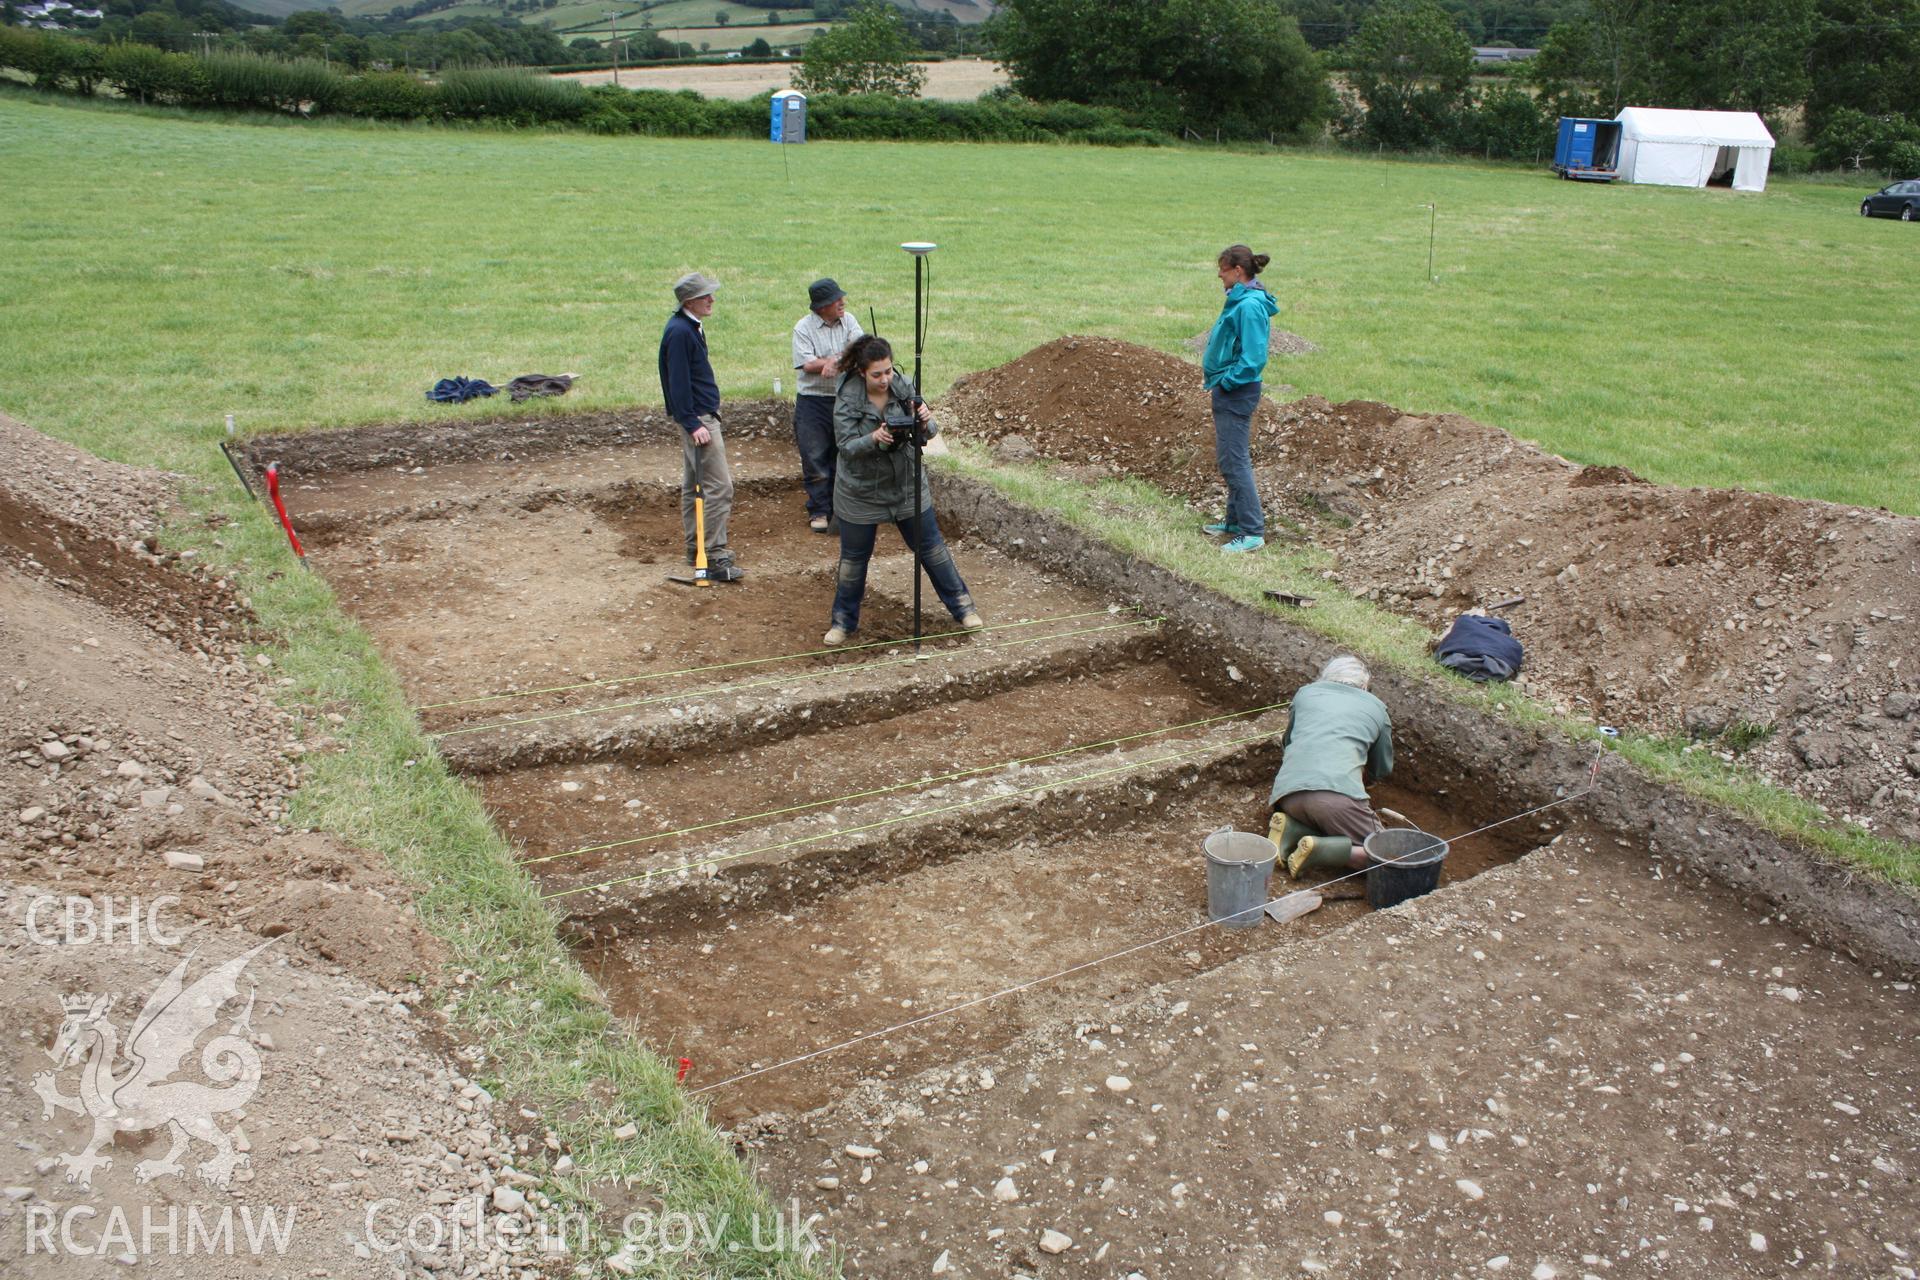 Abermagwr Roman villa; photographs of 2015 excavation season. Excavation in progress in Trench F, over the Roman courtyard